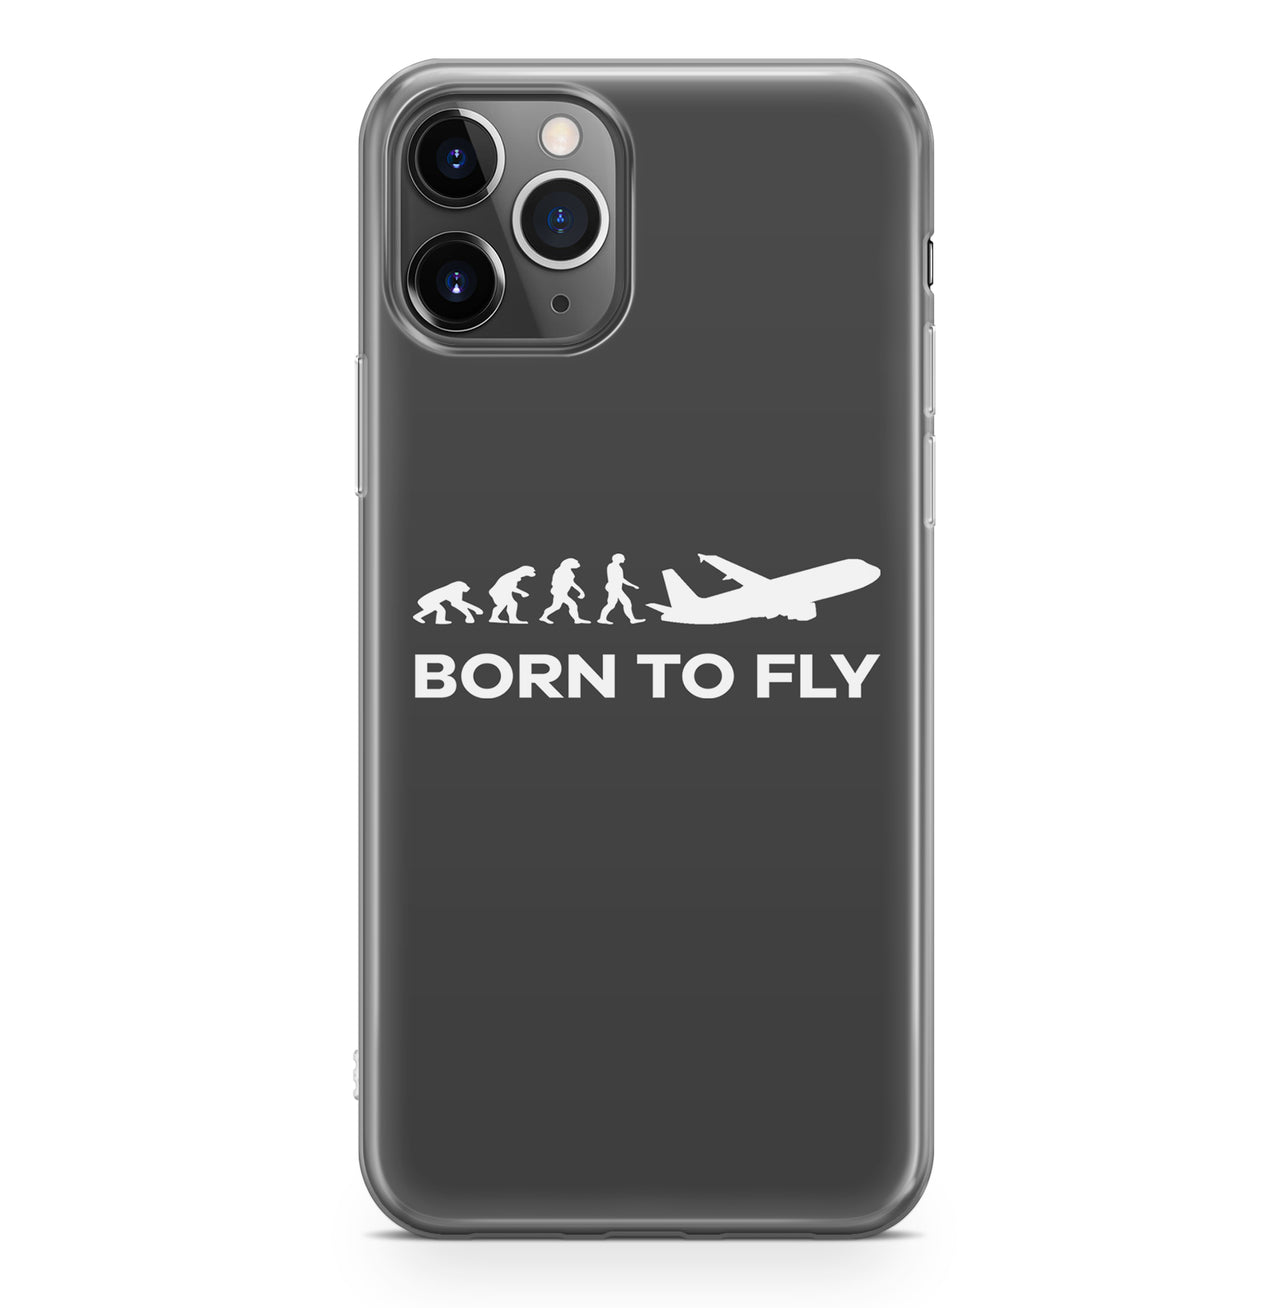 Born To Fly Designed iPhone Cases